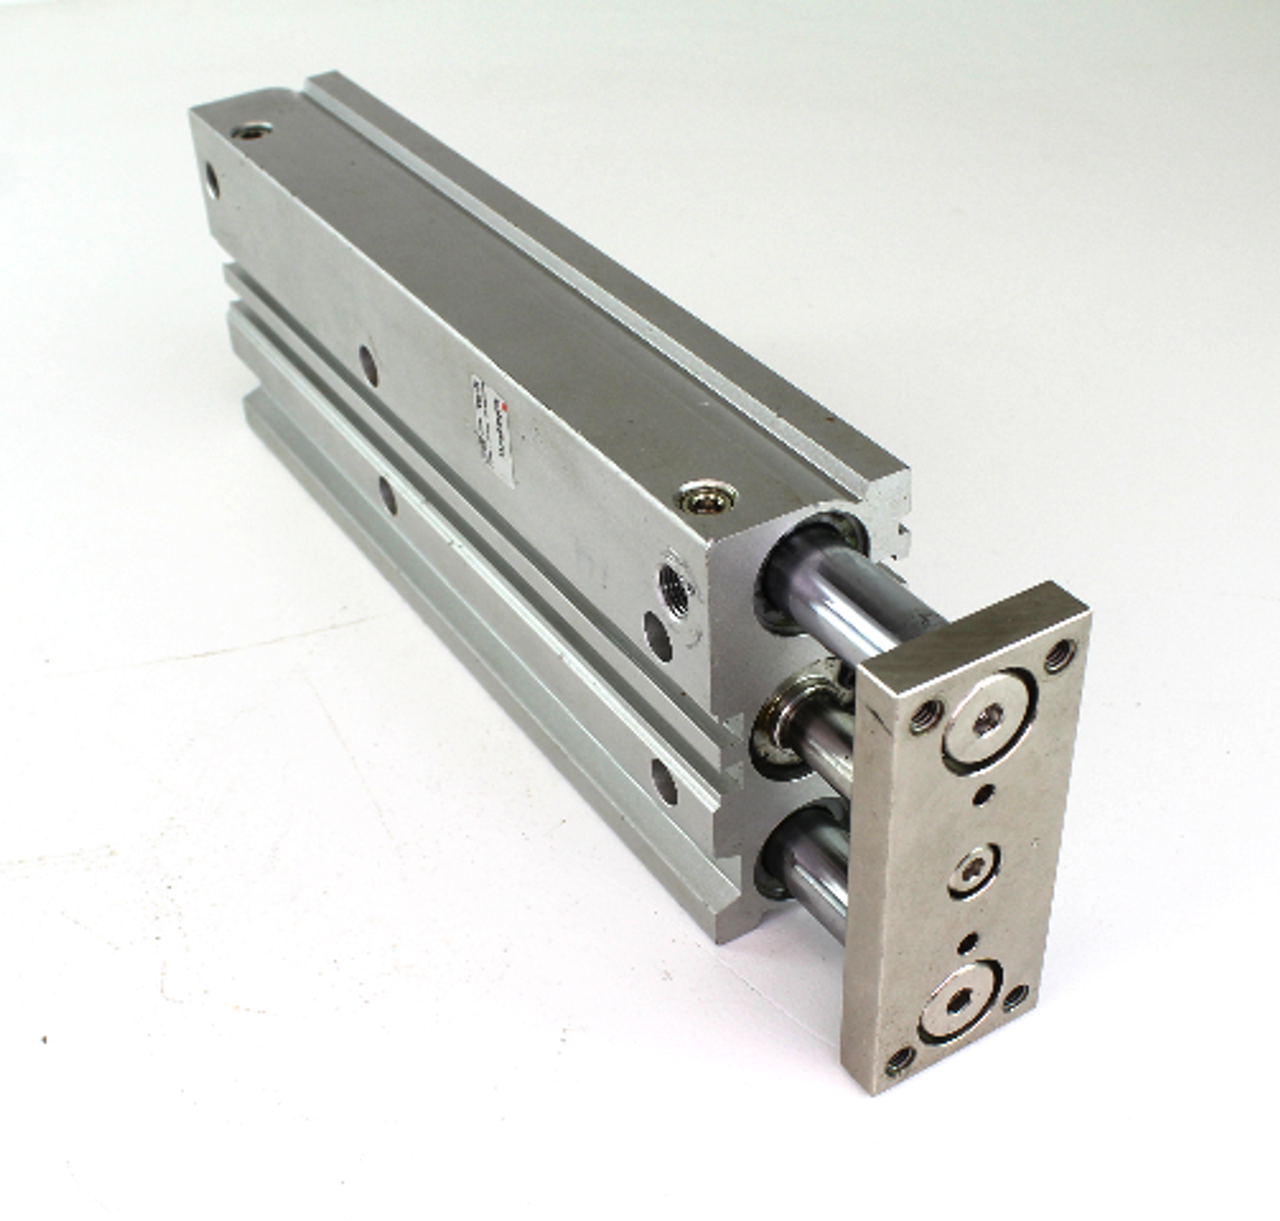 SMC MGPM25N-200 Pneumatic Guide Cylinder 25mm Bore 200 Stroke